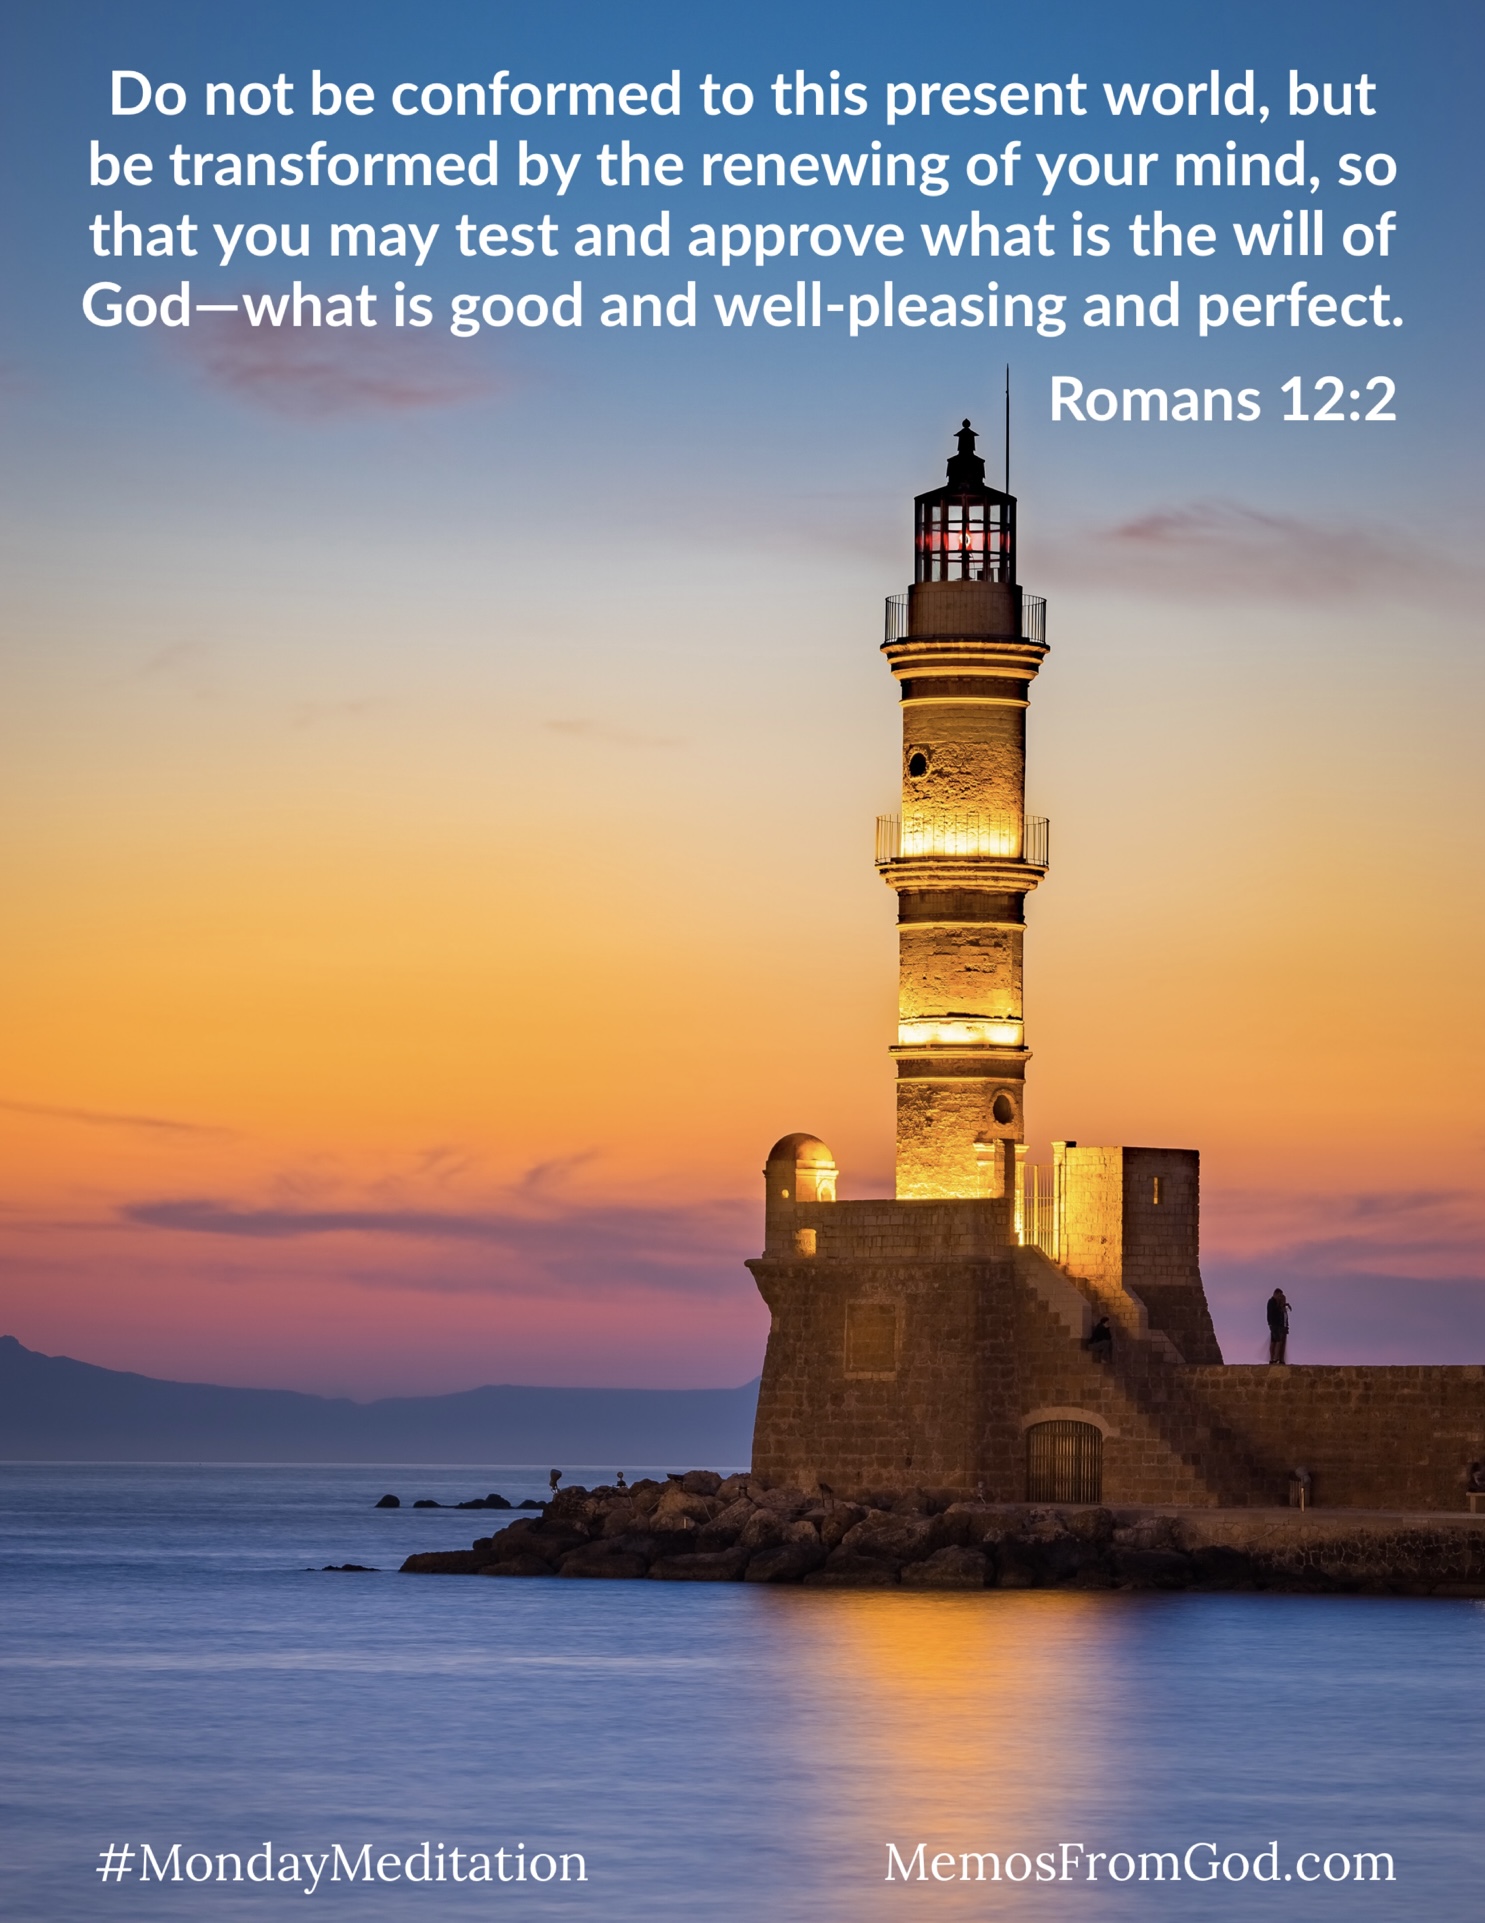 A lighthouse bathed in golden light at dusk. Caption: Do not be conformed to this present world, but be transformed by the renewing of your mind, so that you may test and approve what is the will of God--what is good and well-pleasing and perfect. Romans 12:2